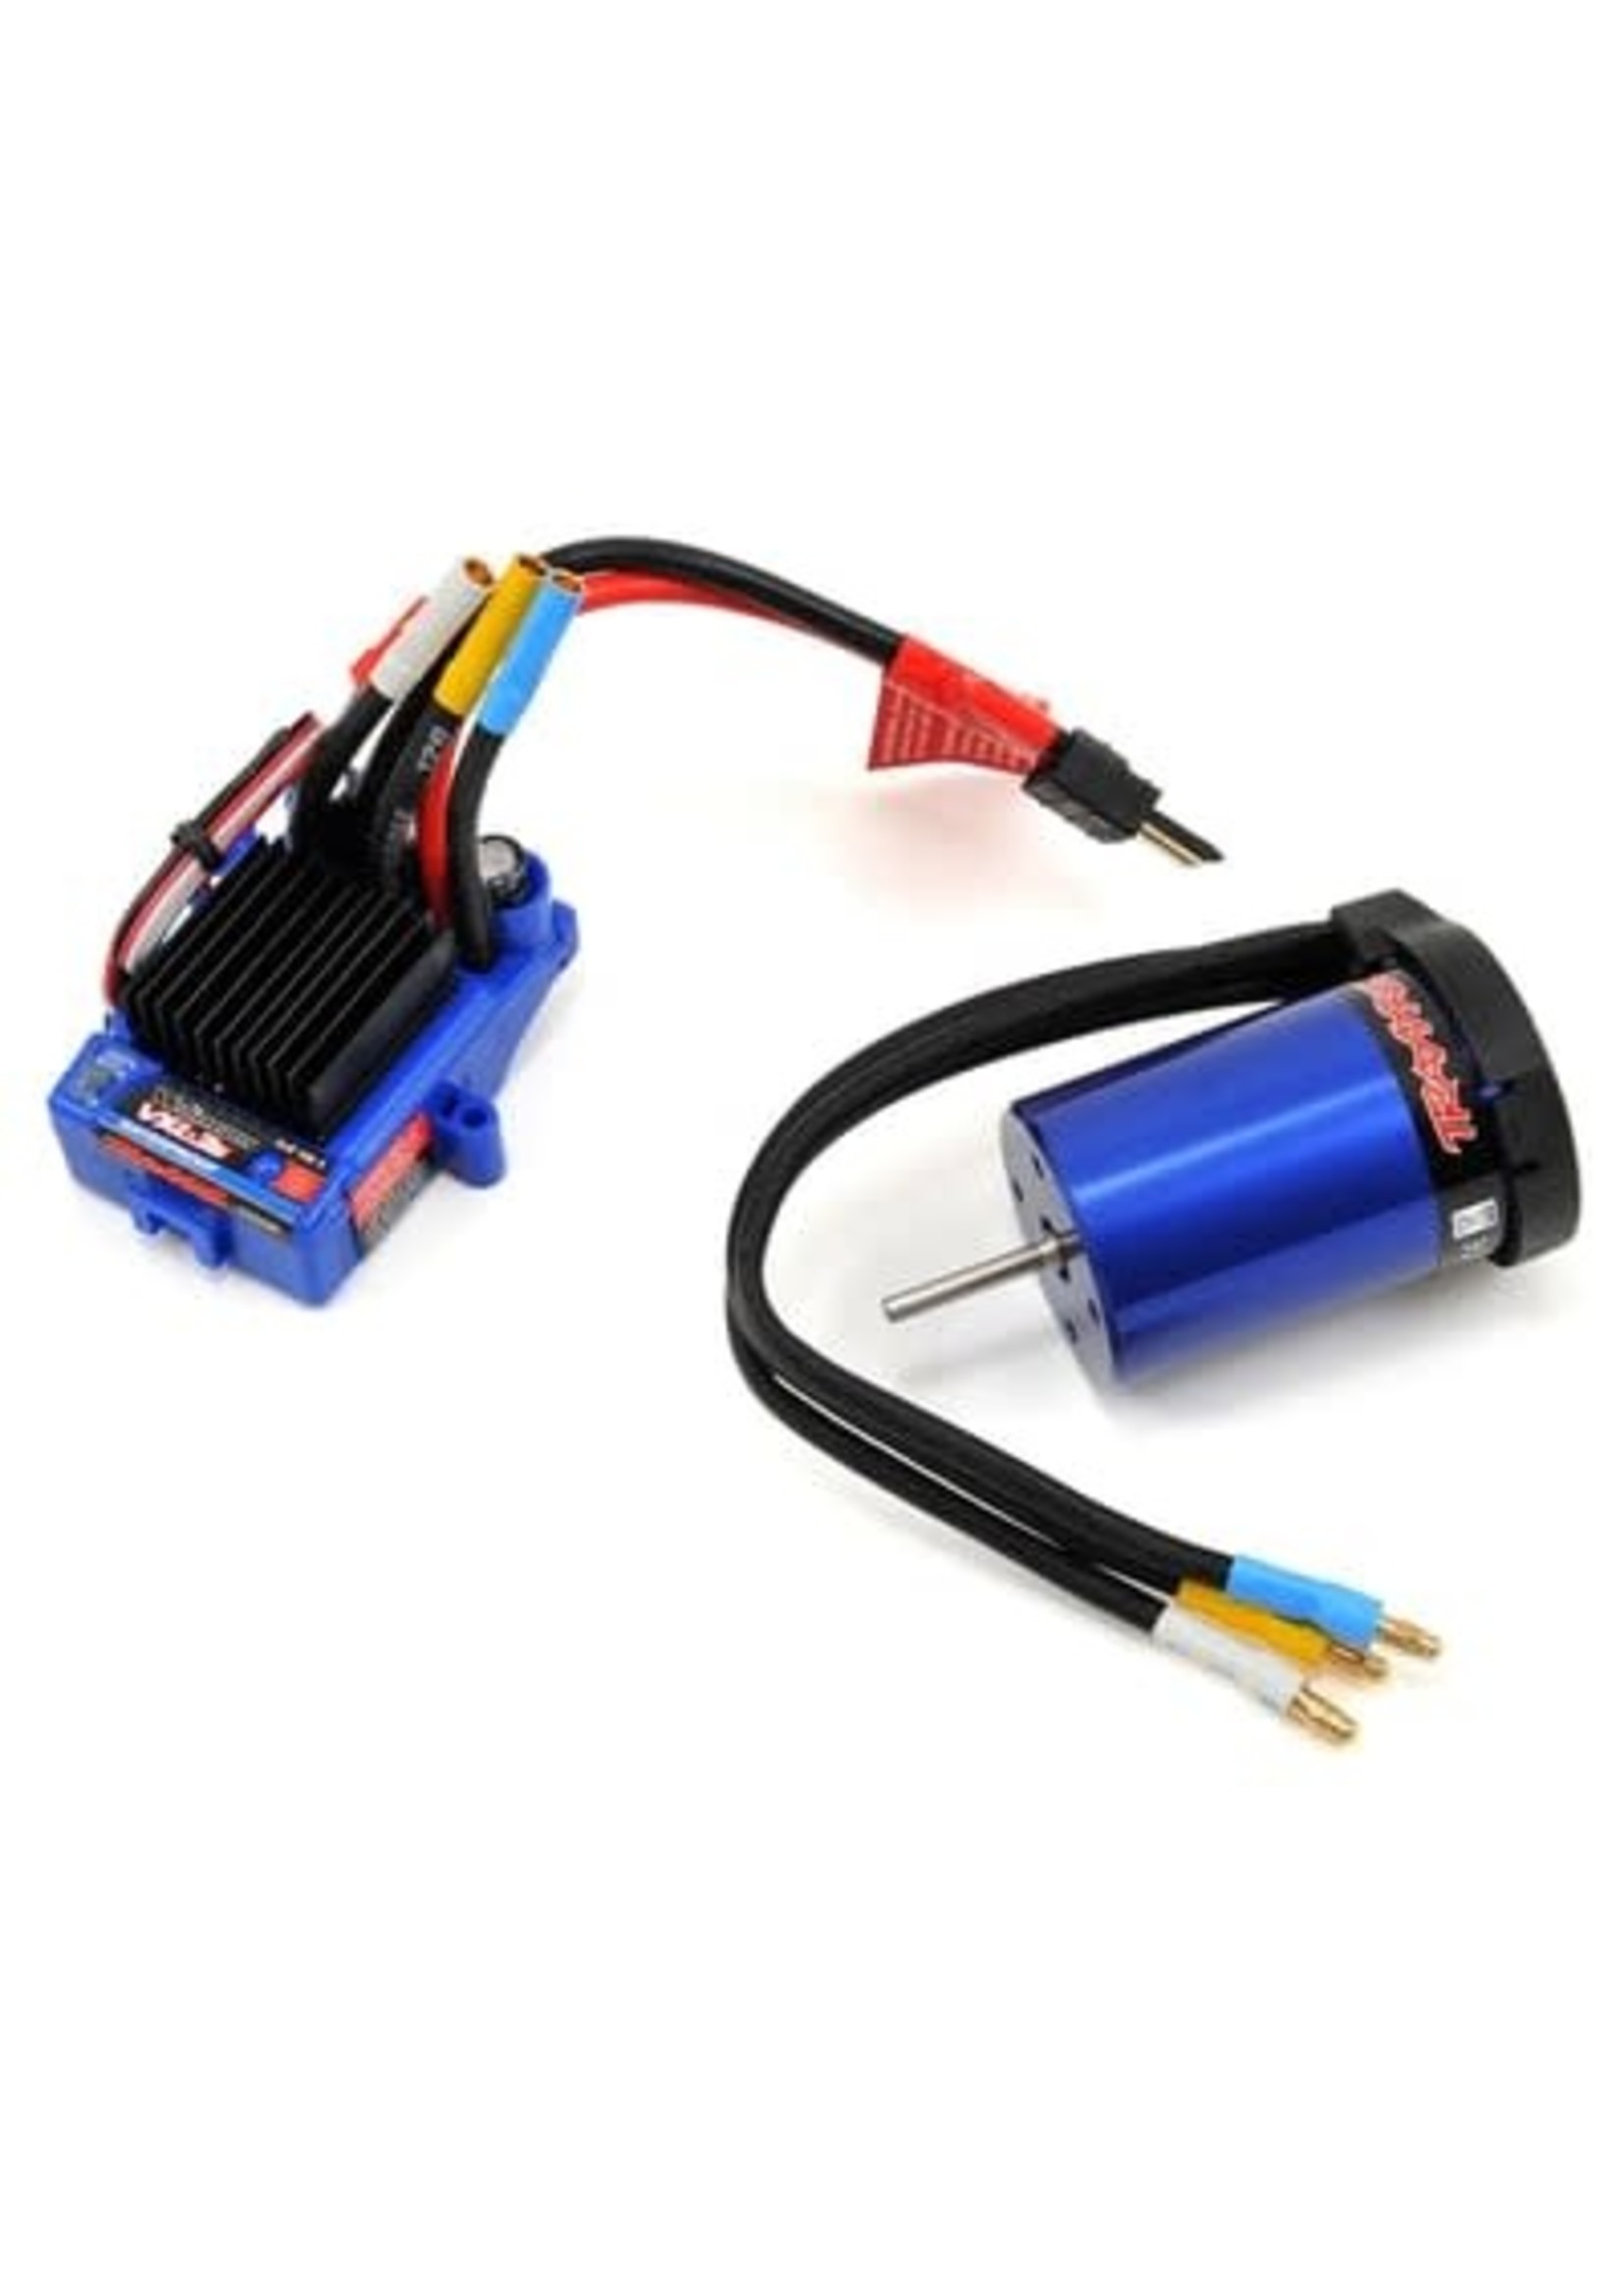 Traxxas 3350R Velineon VXL-3s Brushless Power System, waterproof (includes VXL-3s waterproof ESC, Velineon 3500 motor, and speed control mounting plate (part #3725R))